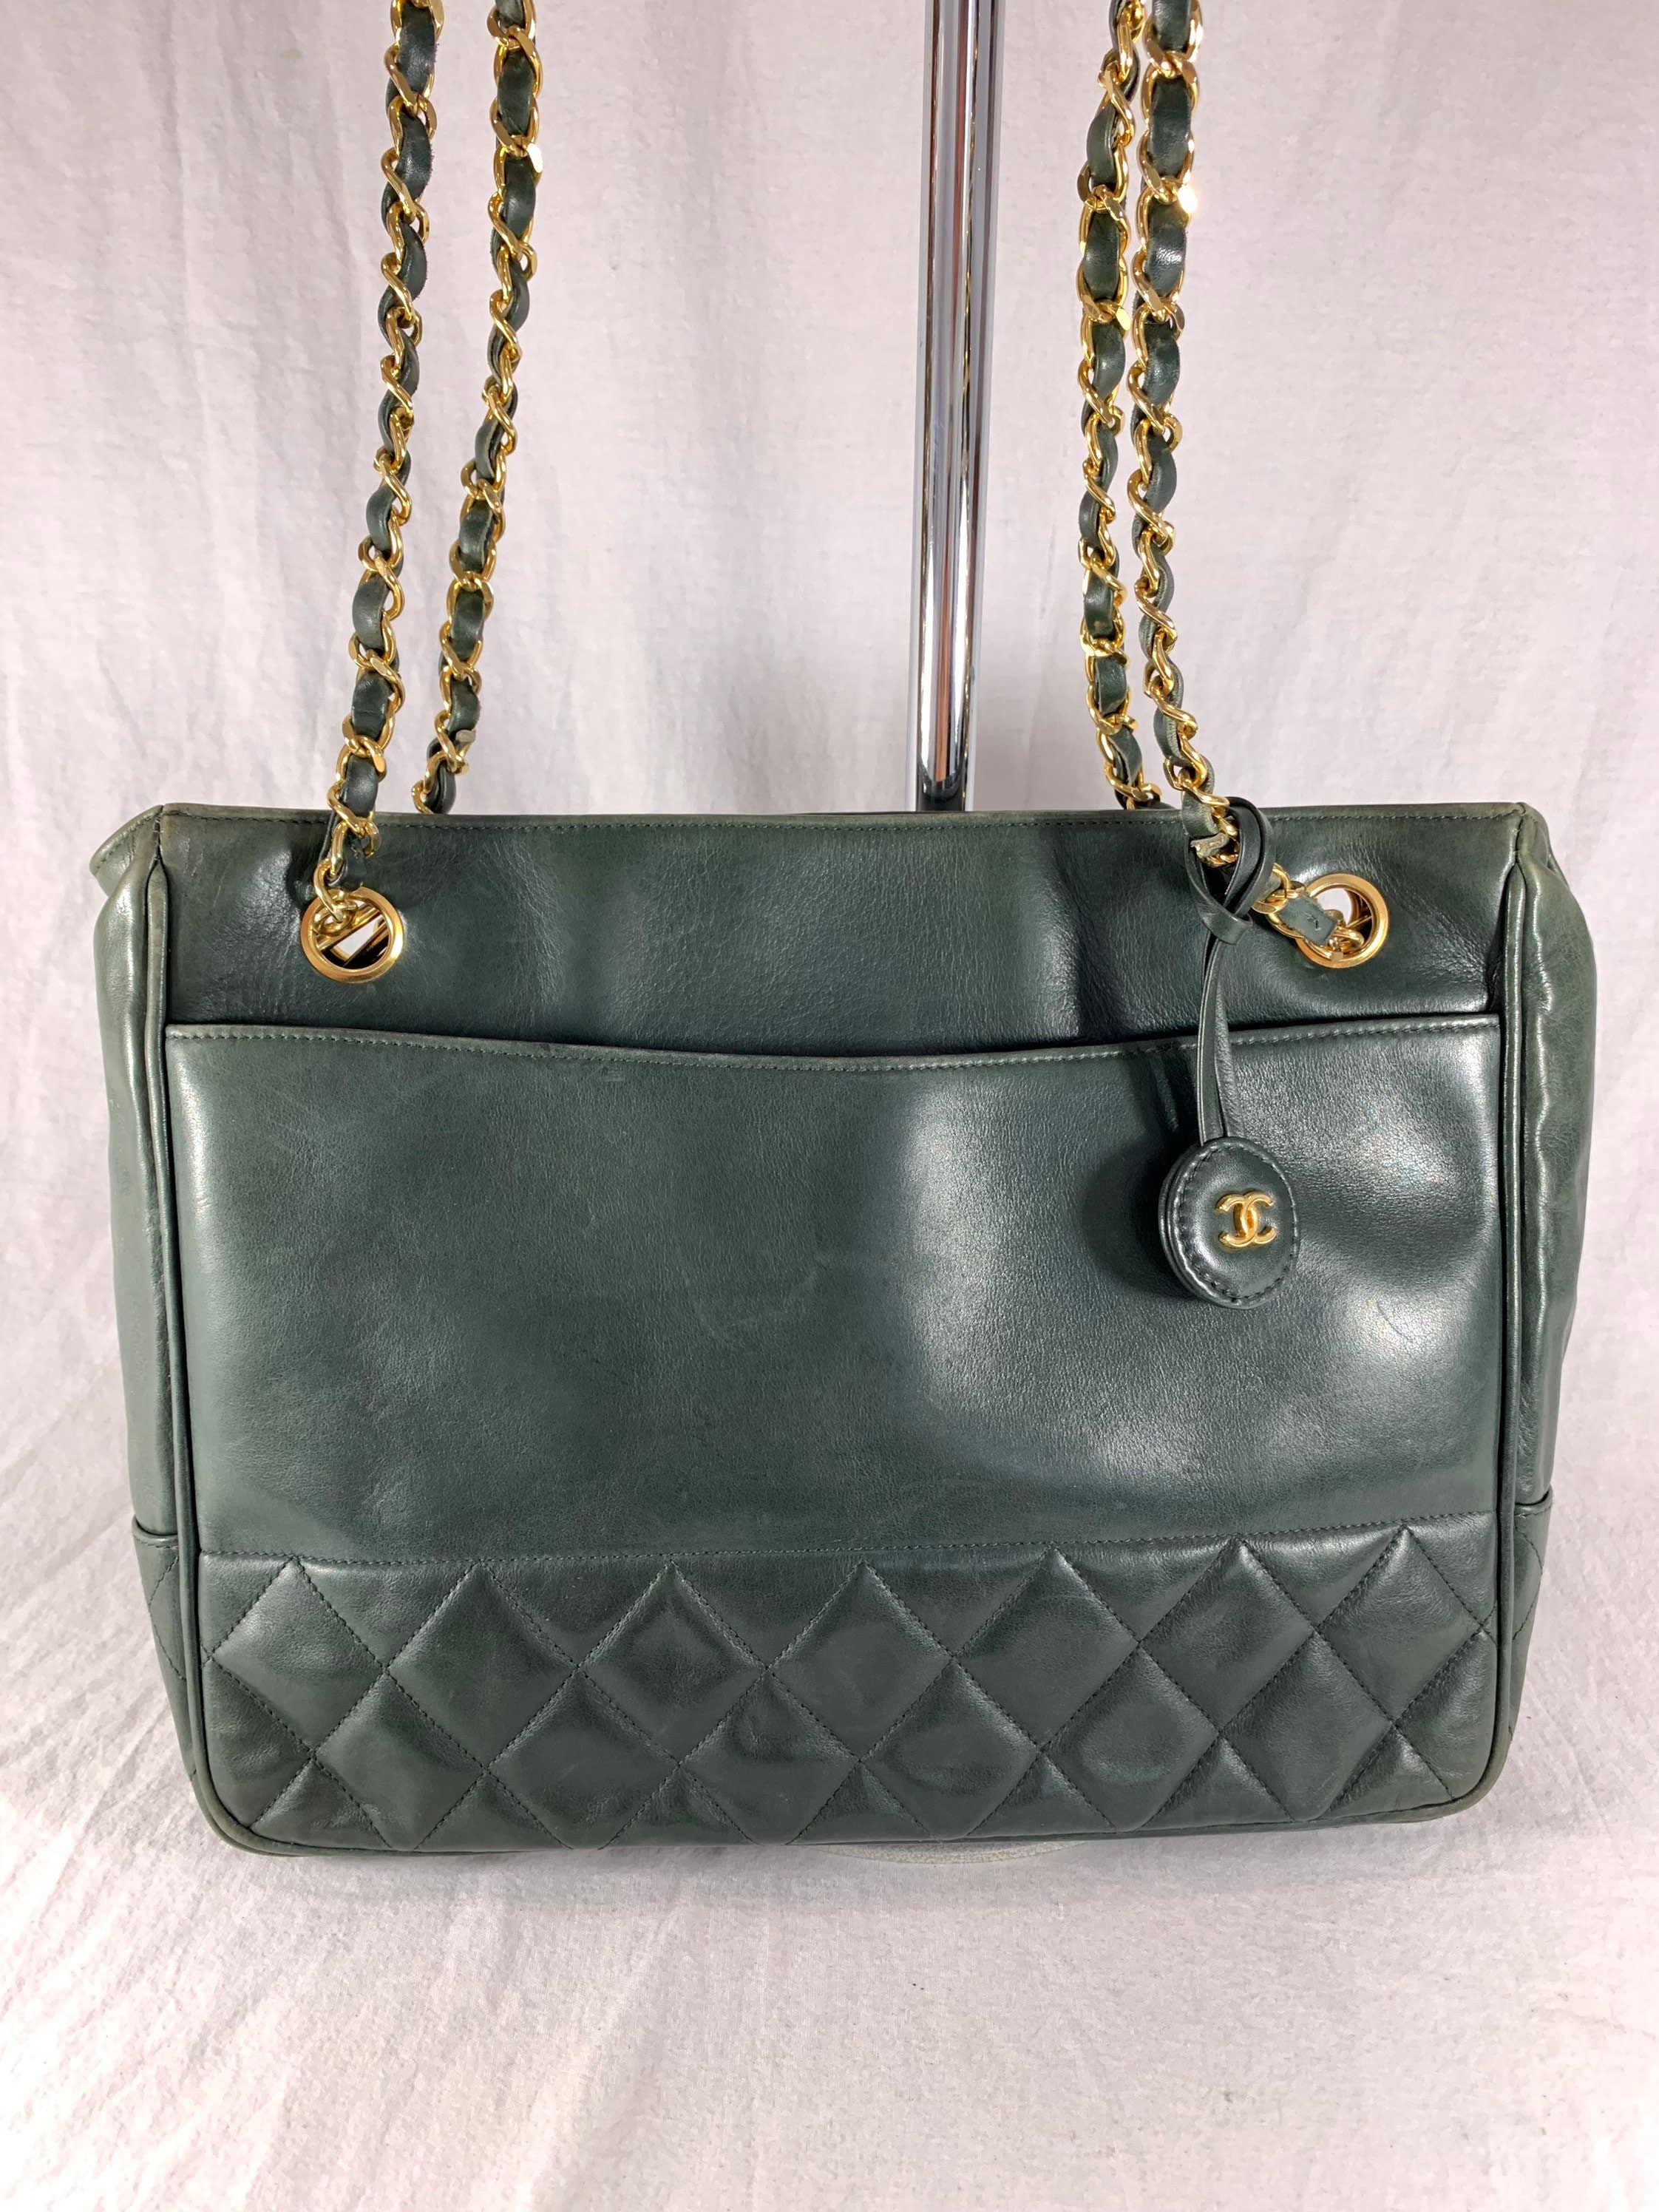 CHANEL Vintage Classic Quilted Green Leather Chain Link Tote 